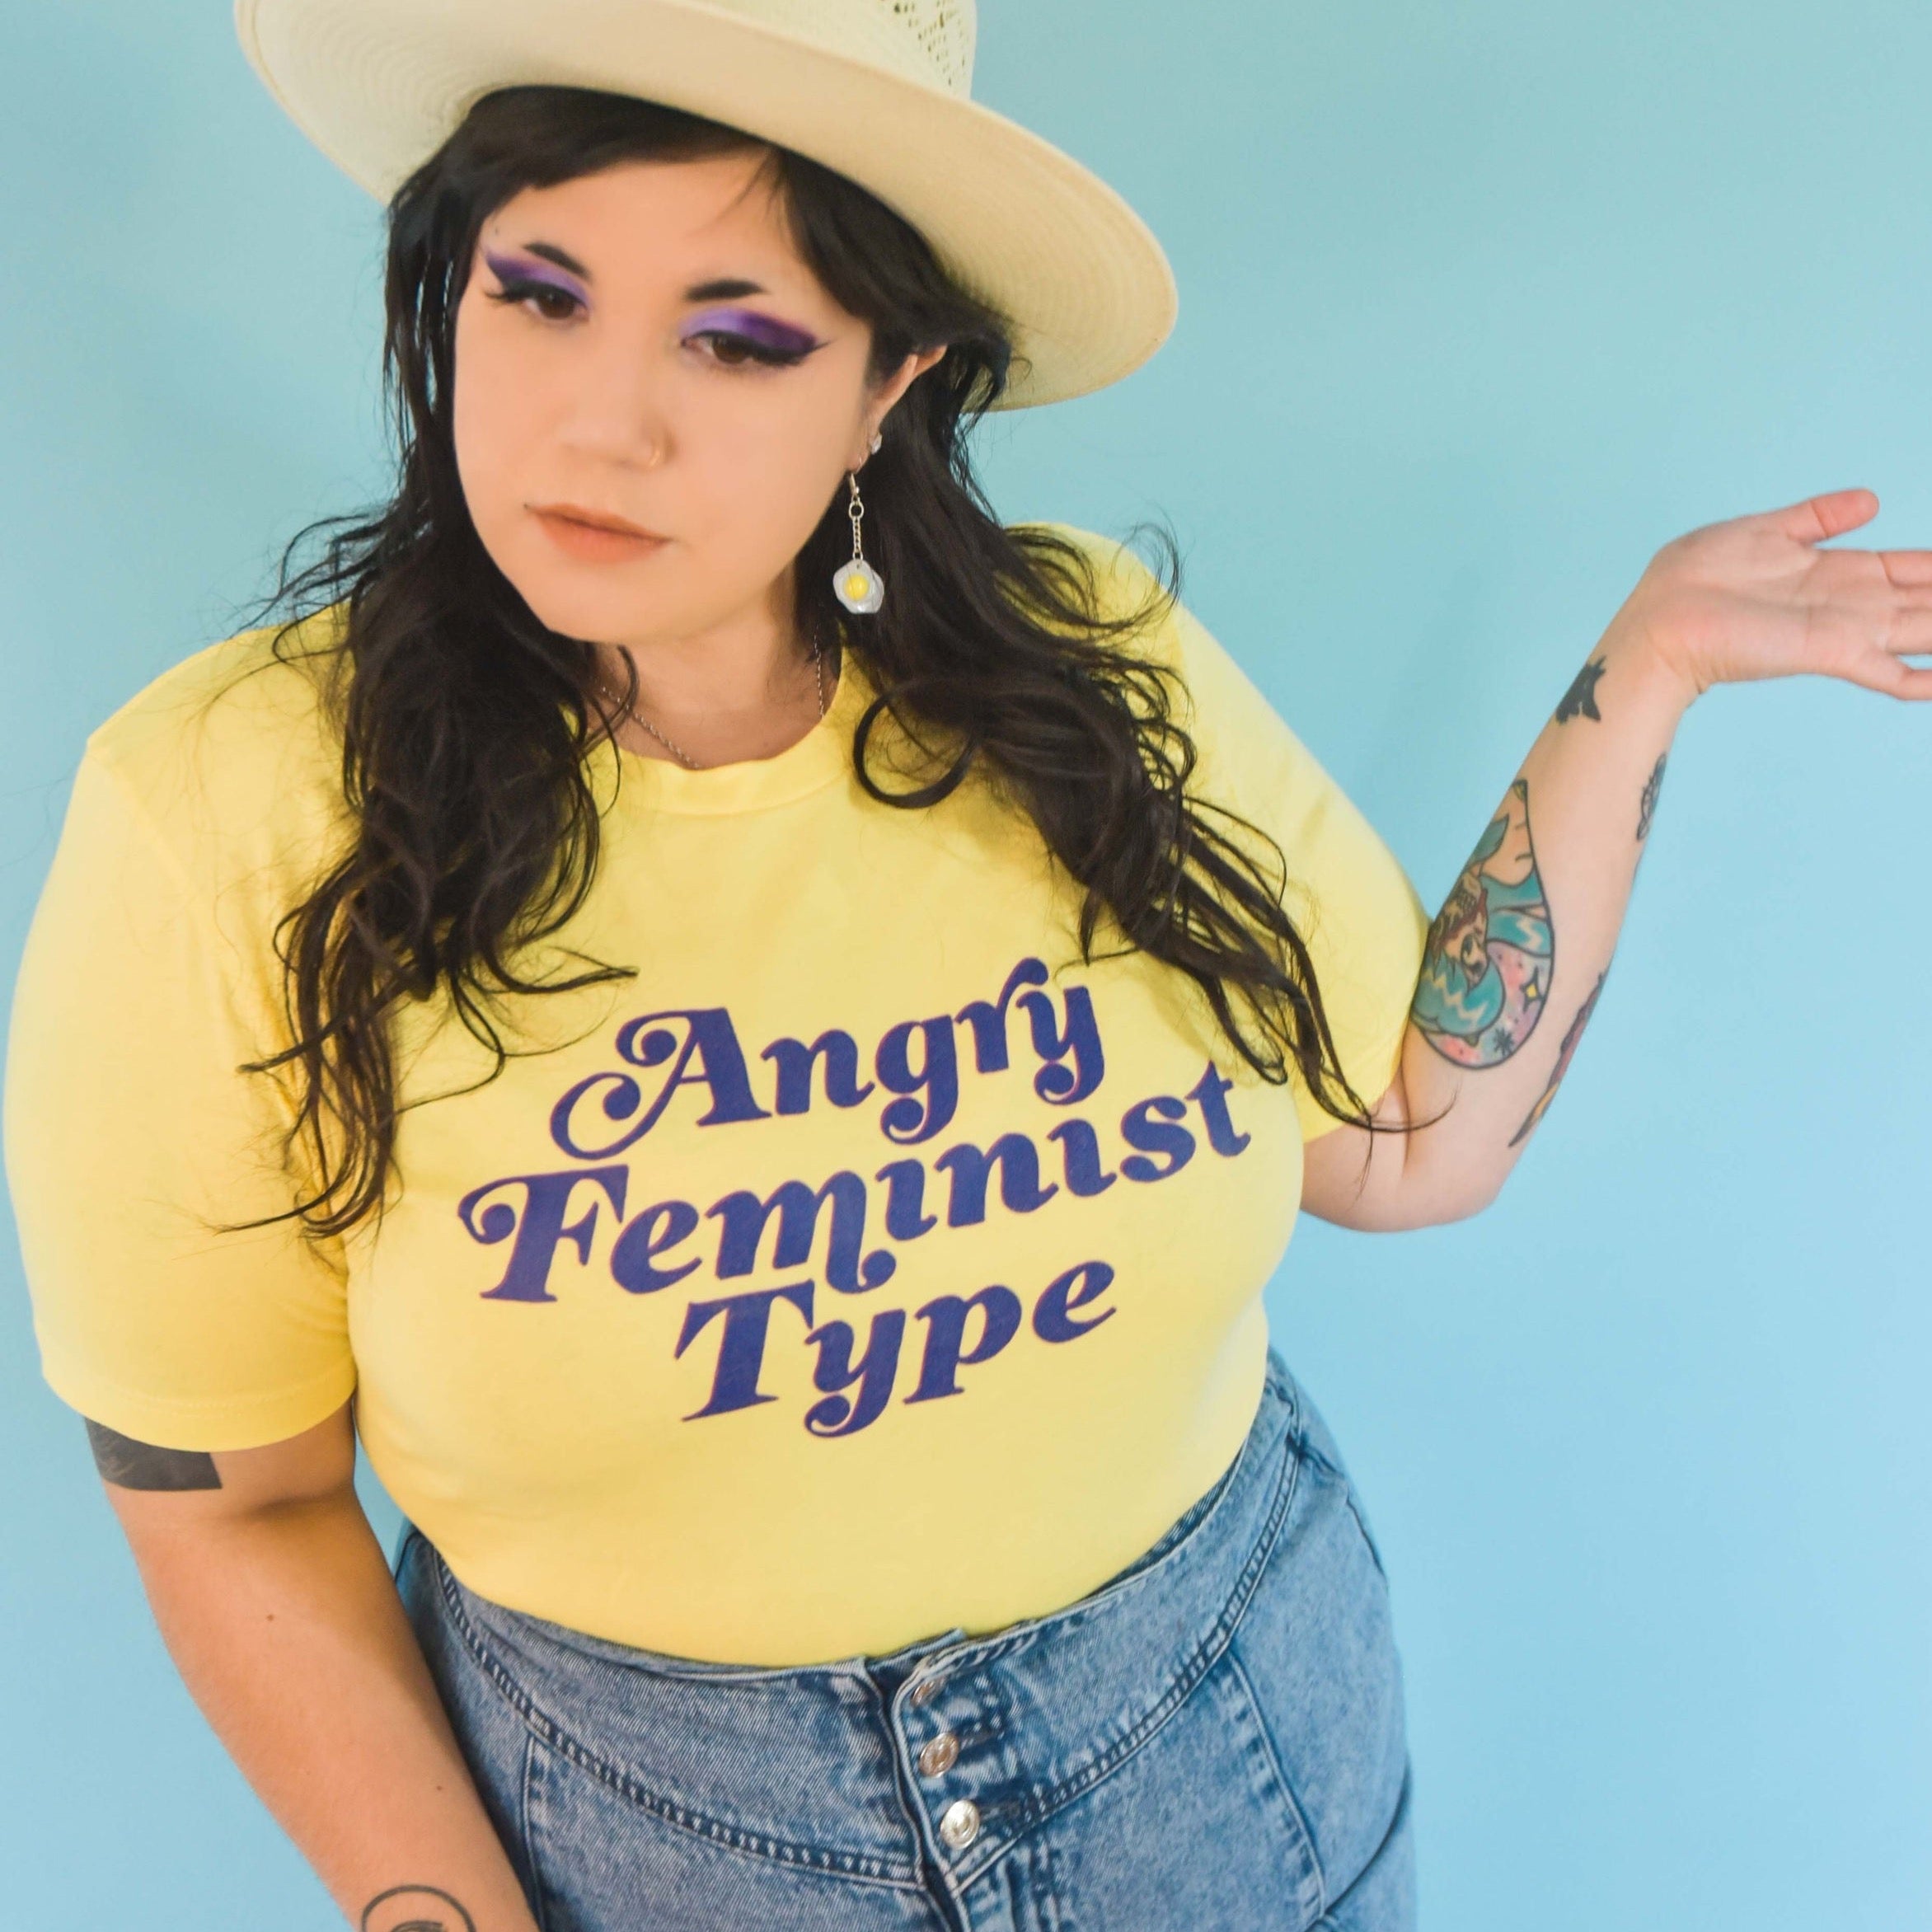 Empowering yellow feminist shirt featuring the strong message "Angry Feminist Type."